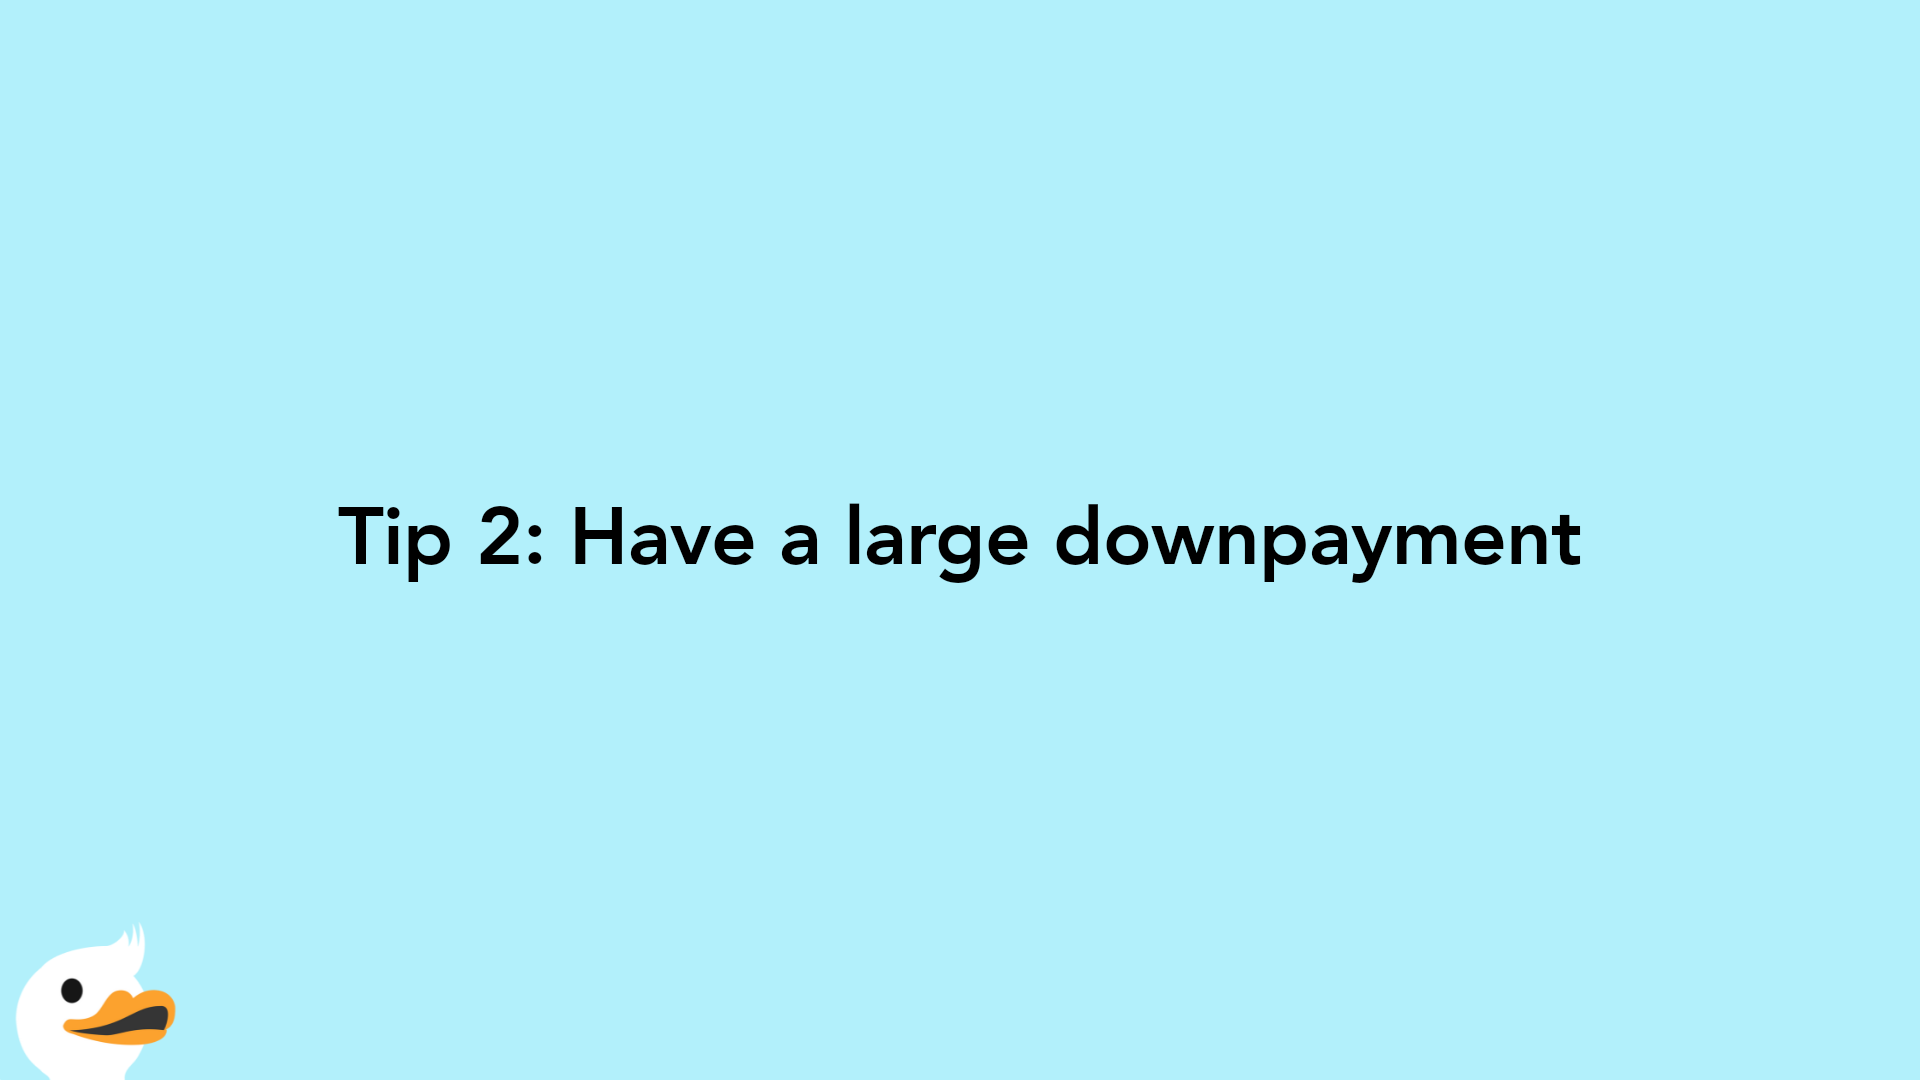 Tip 2: Have a large downpayment